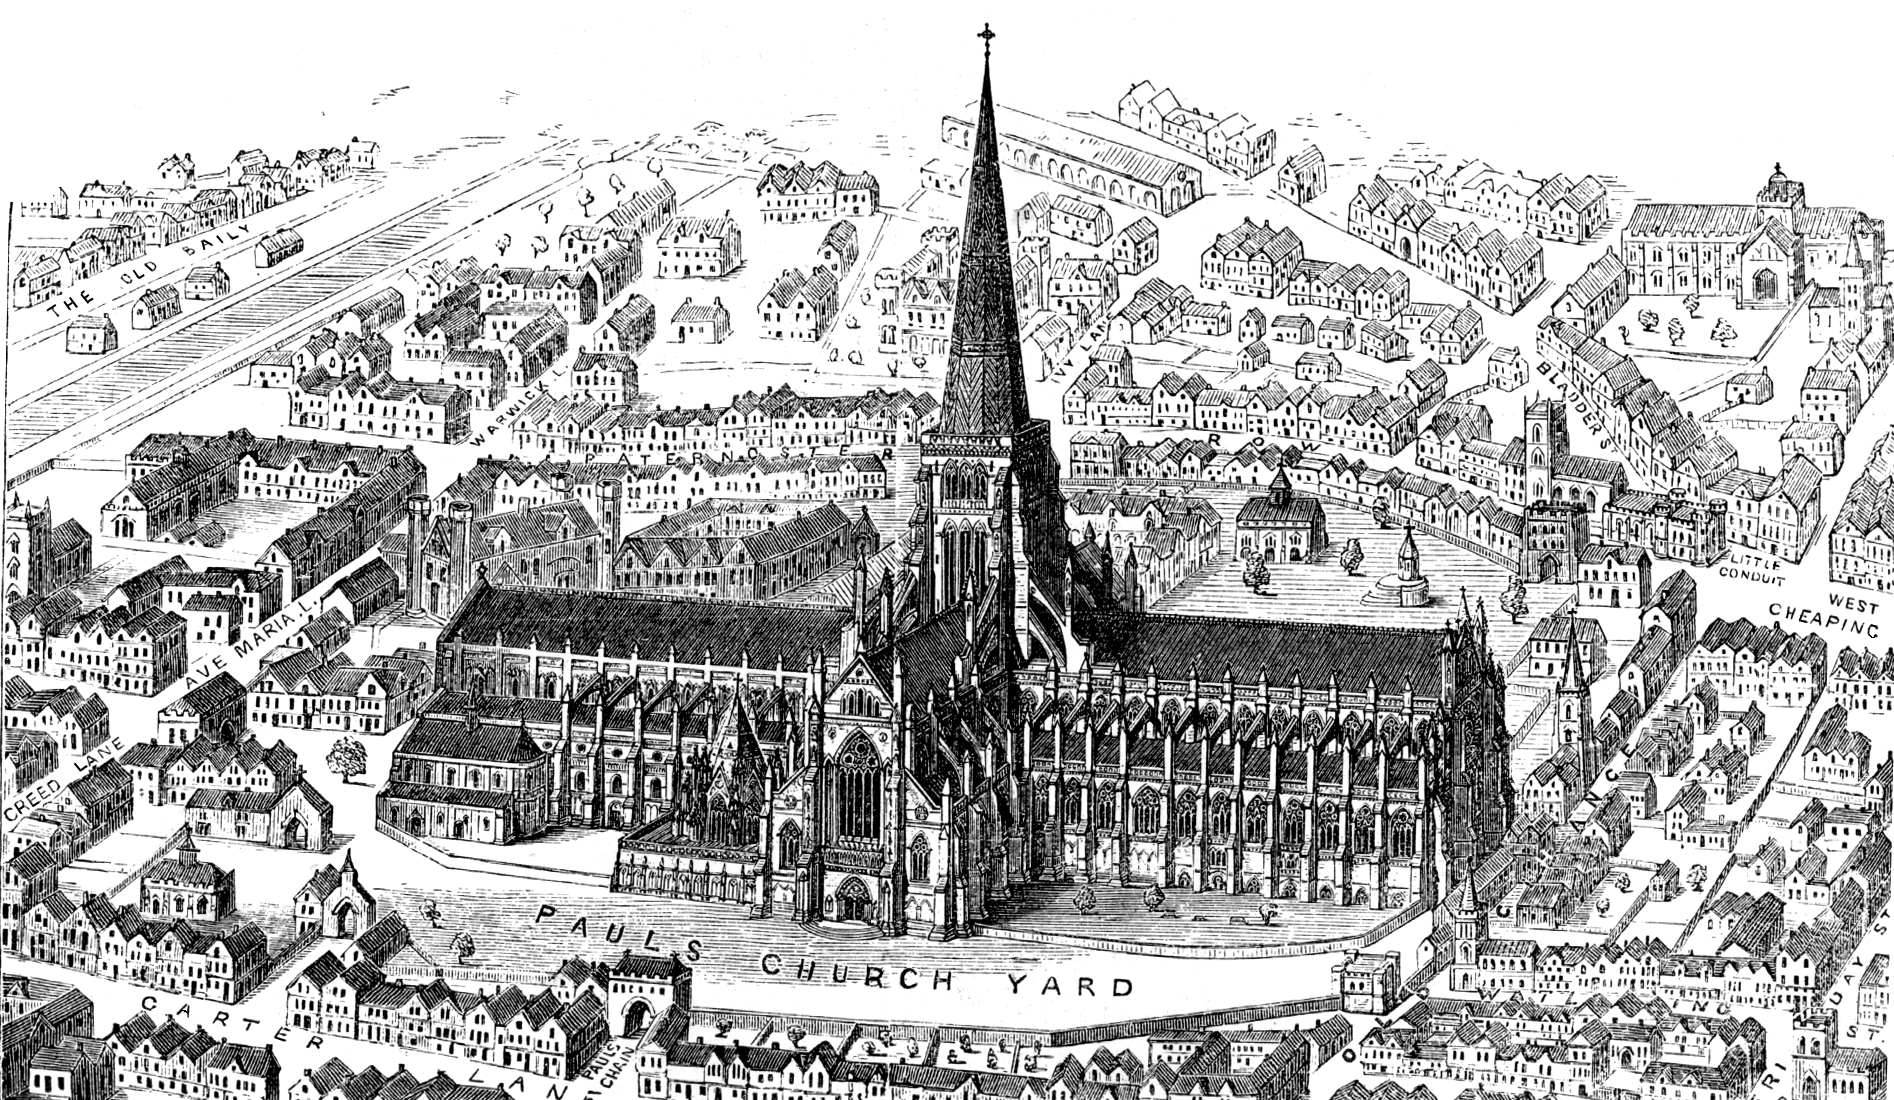 The Old St Paul's Cathedral